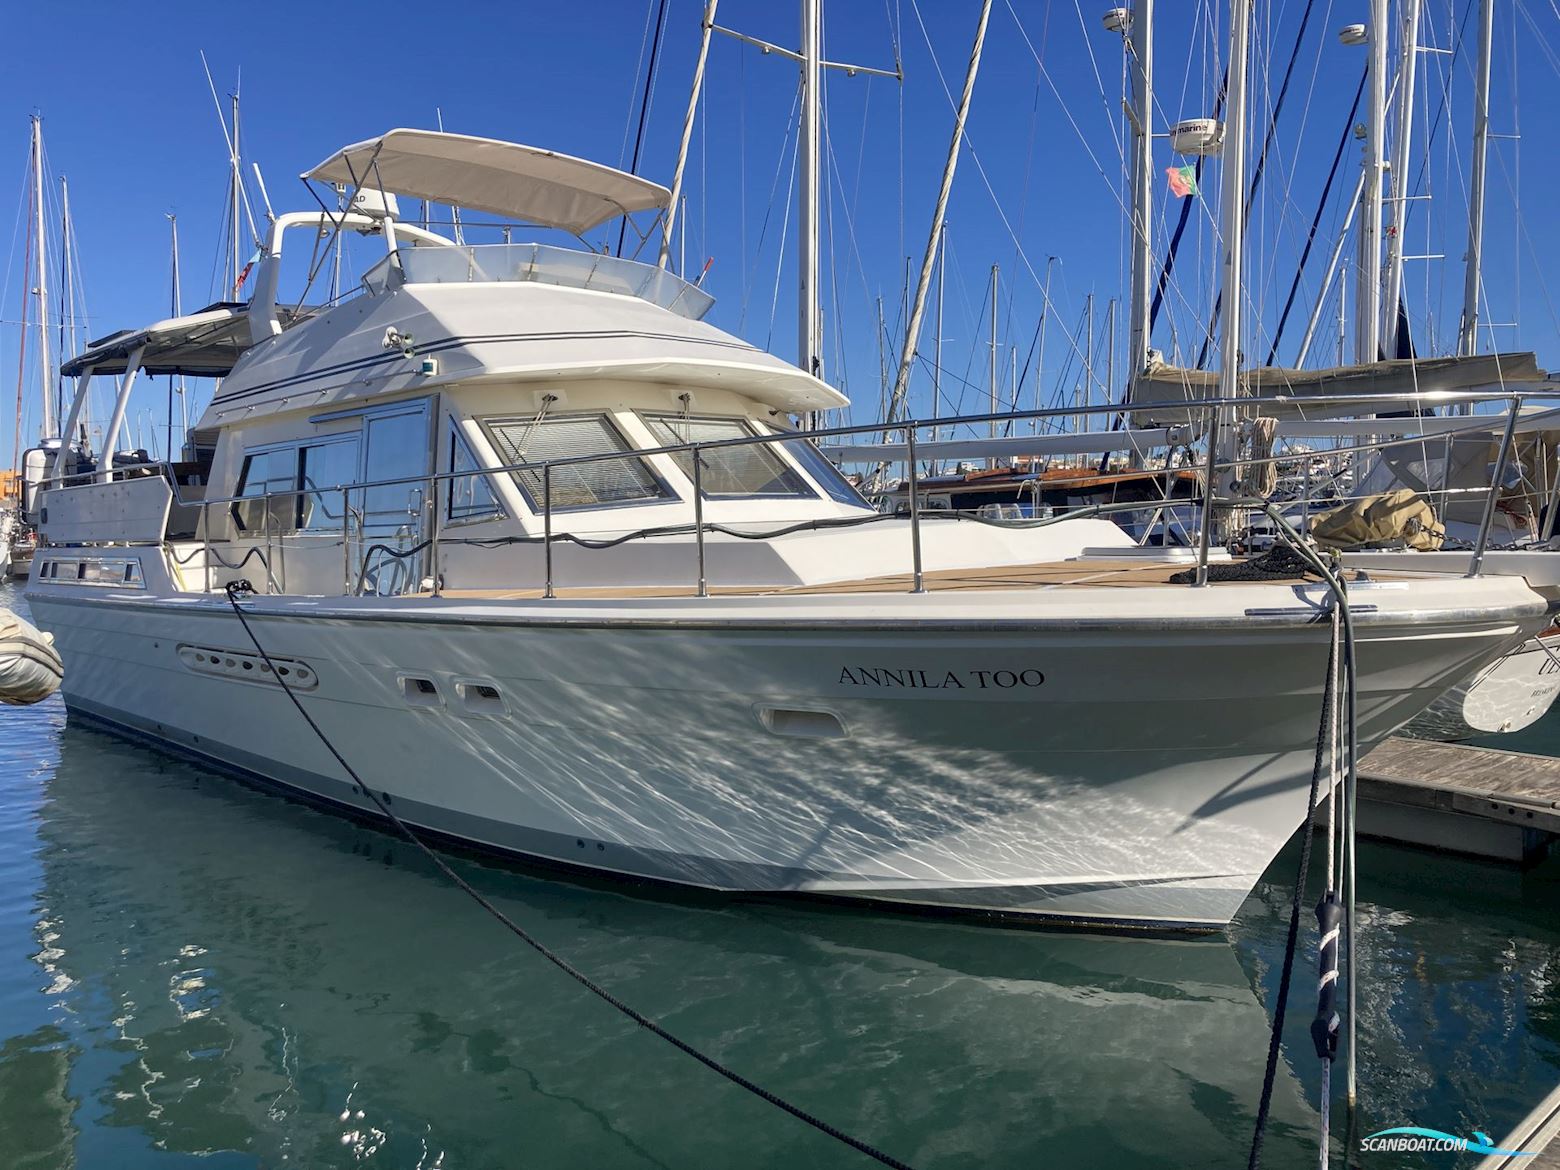 Live Aboard And Well Maintained Cruising Motor Yacht Motorbåt 1991, med 2 * Caterpillar 3208 motor, Portugal